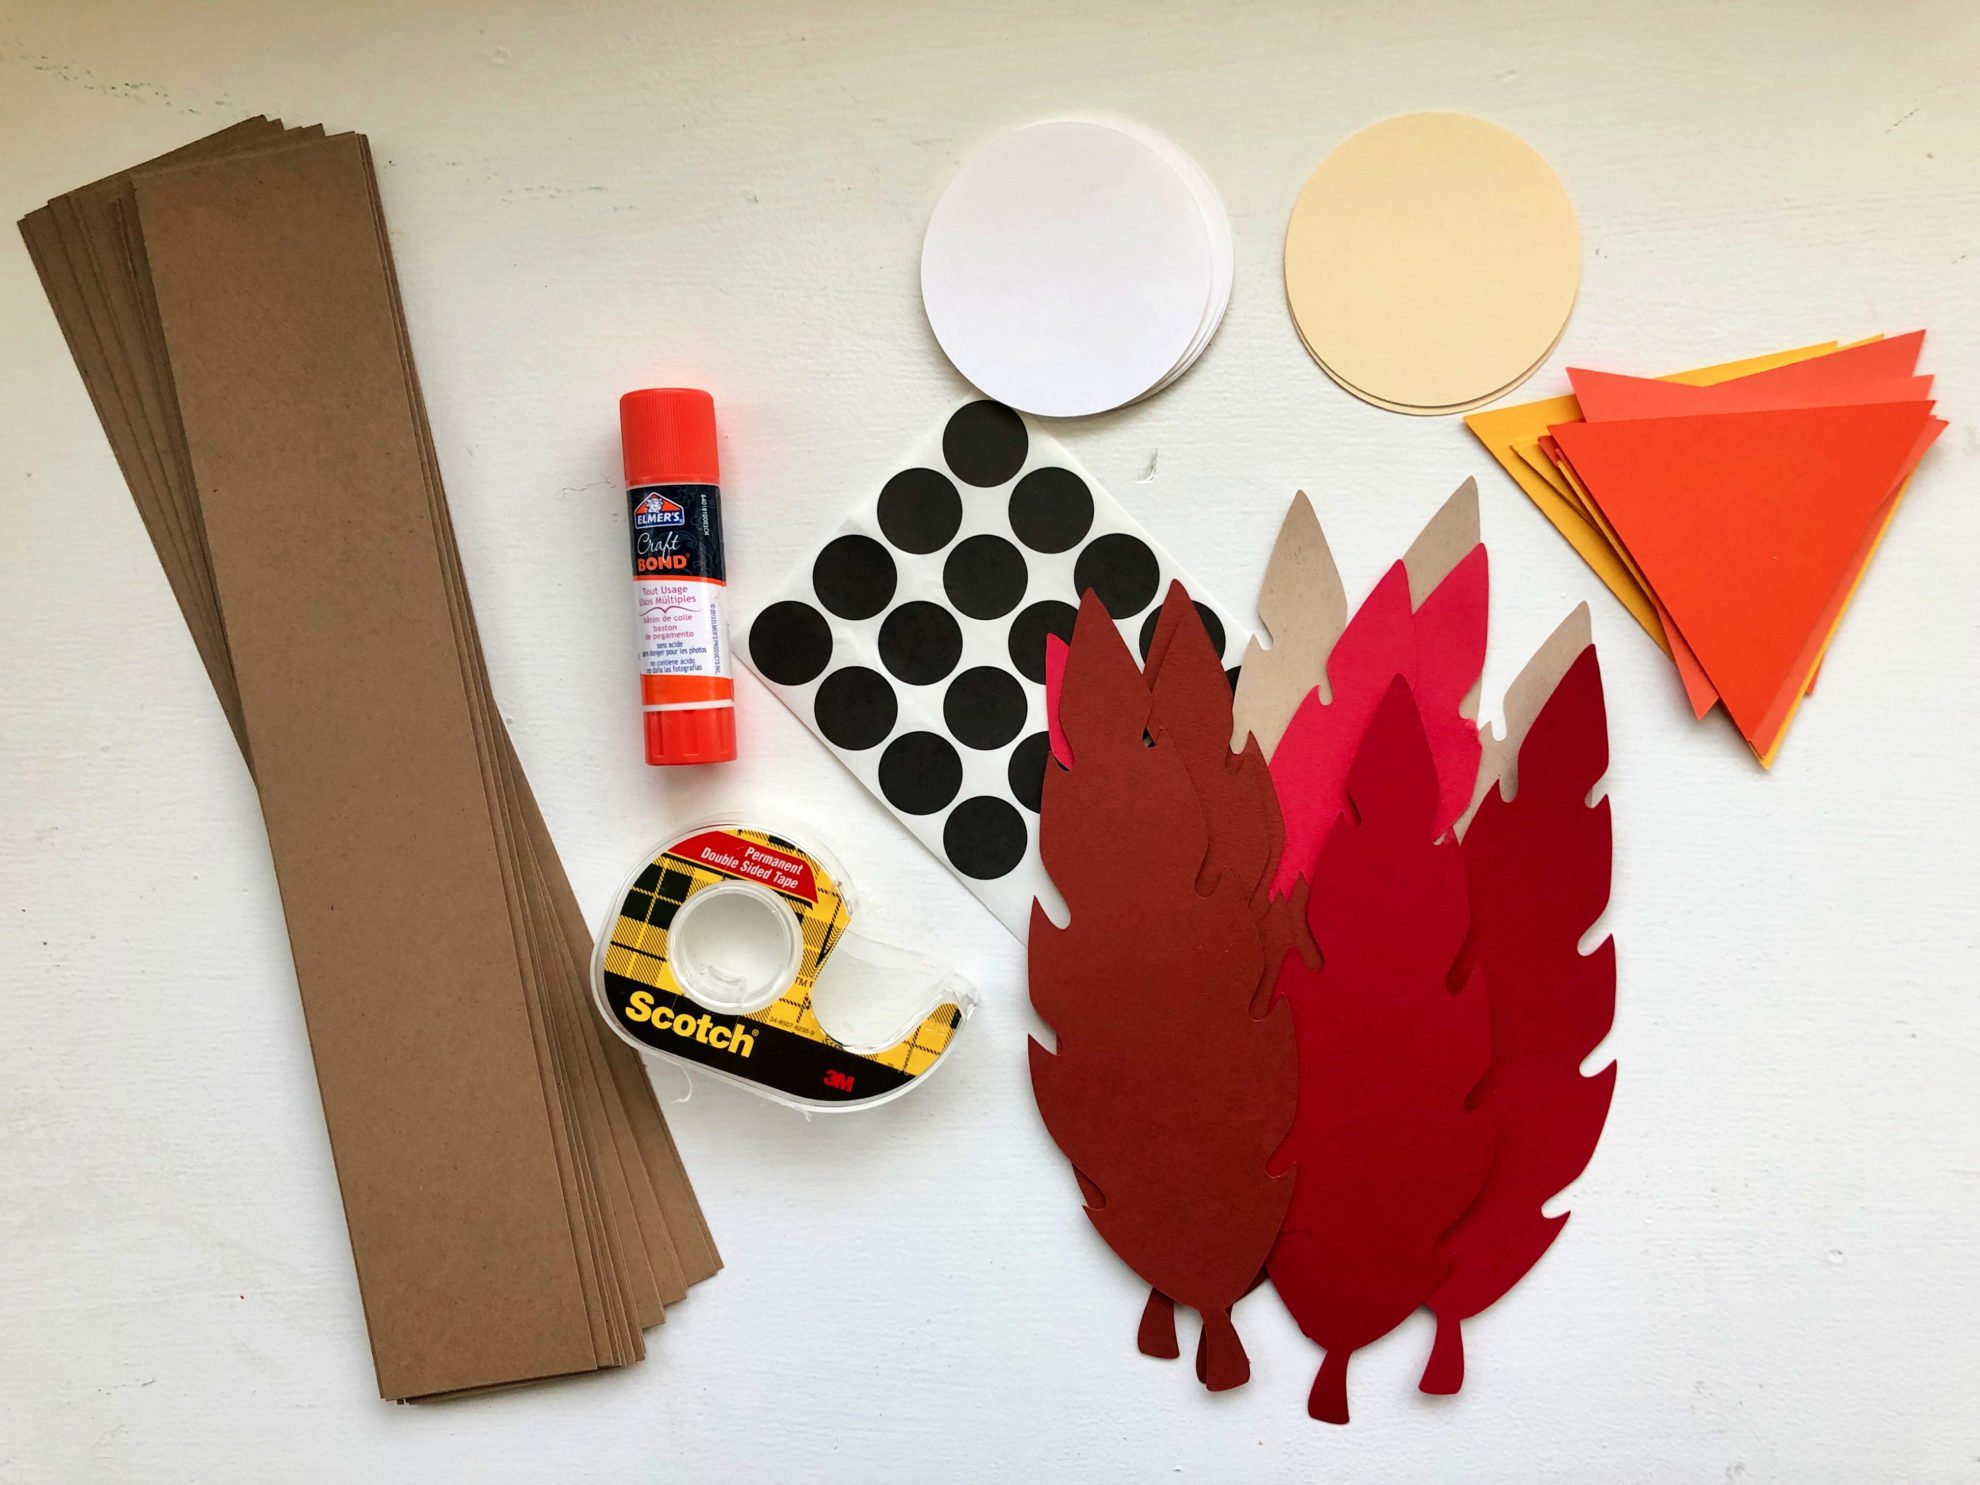 Supplies: brown card stock strips, paper feathers, orange paper beaks, tape, glue, black dots.